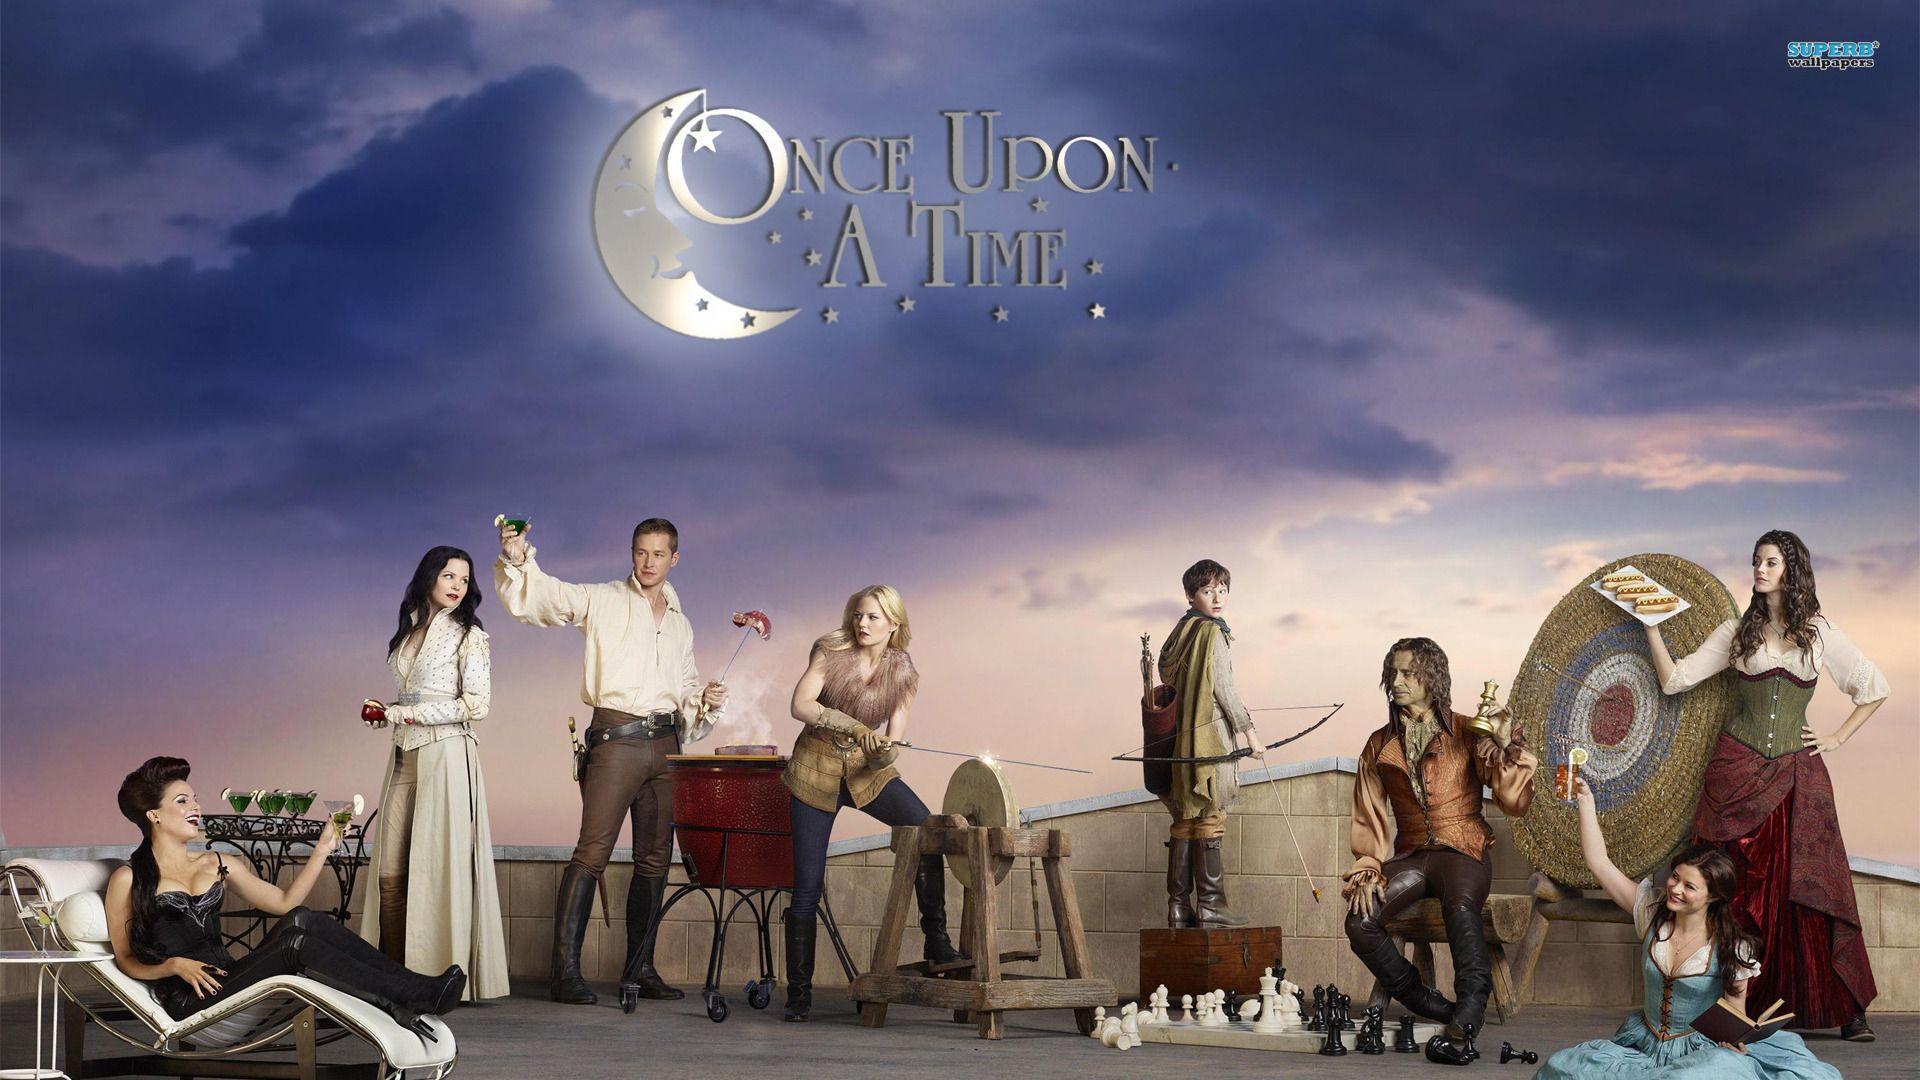 Once Upon A Time HD Wallpaper for desktop download